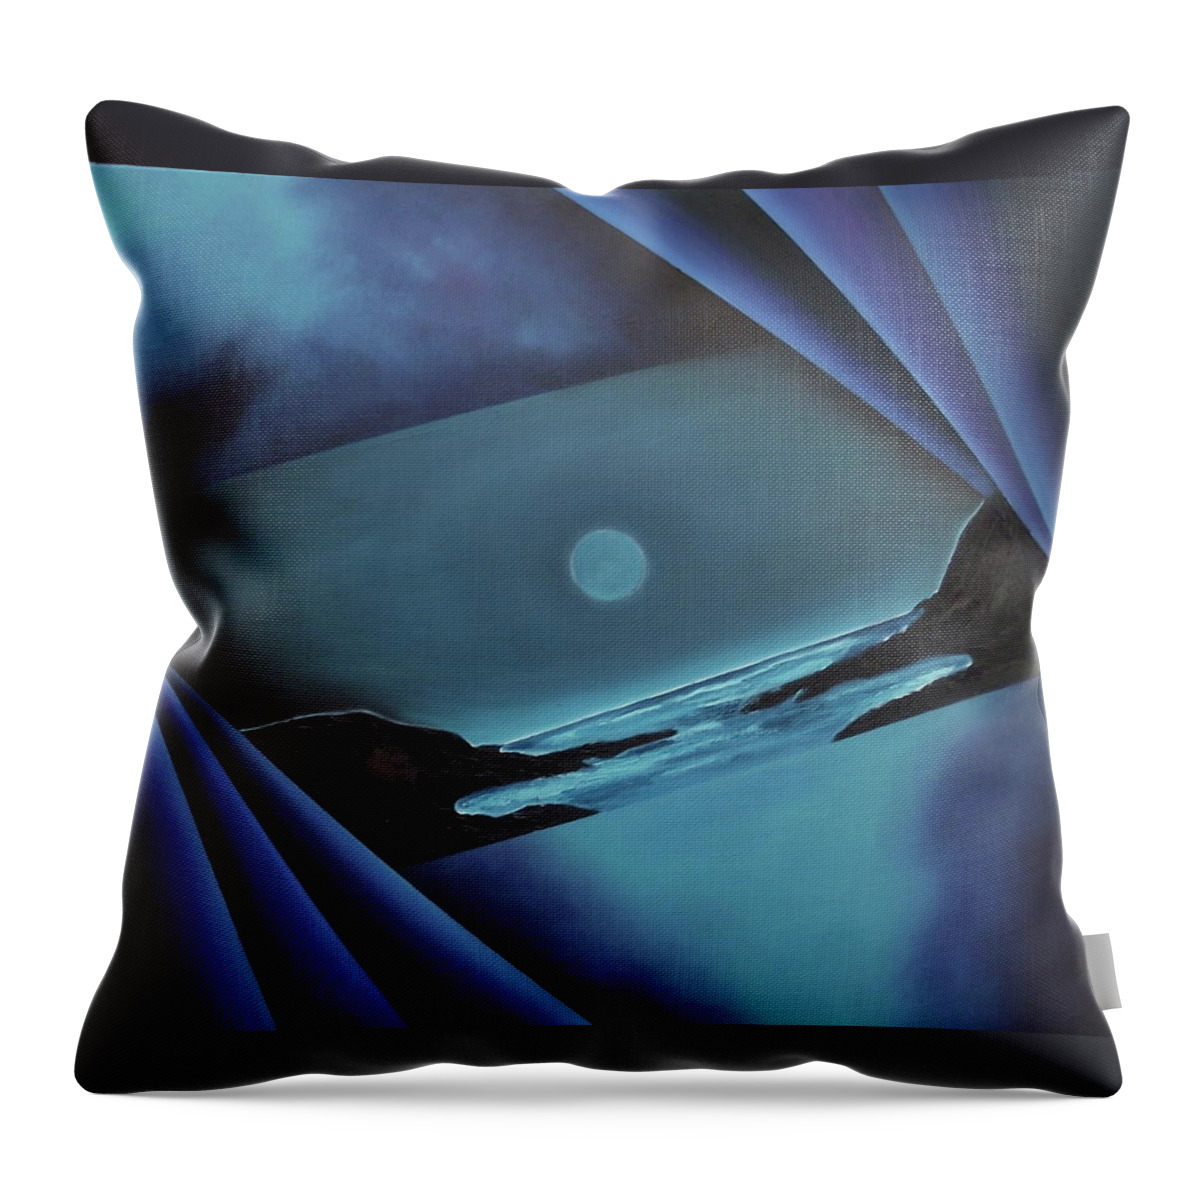  Throw Pillow featuring the painting Flowing Through by Ara Elena